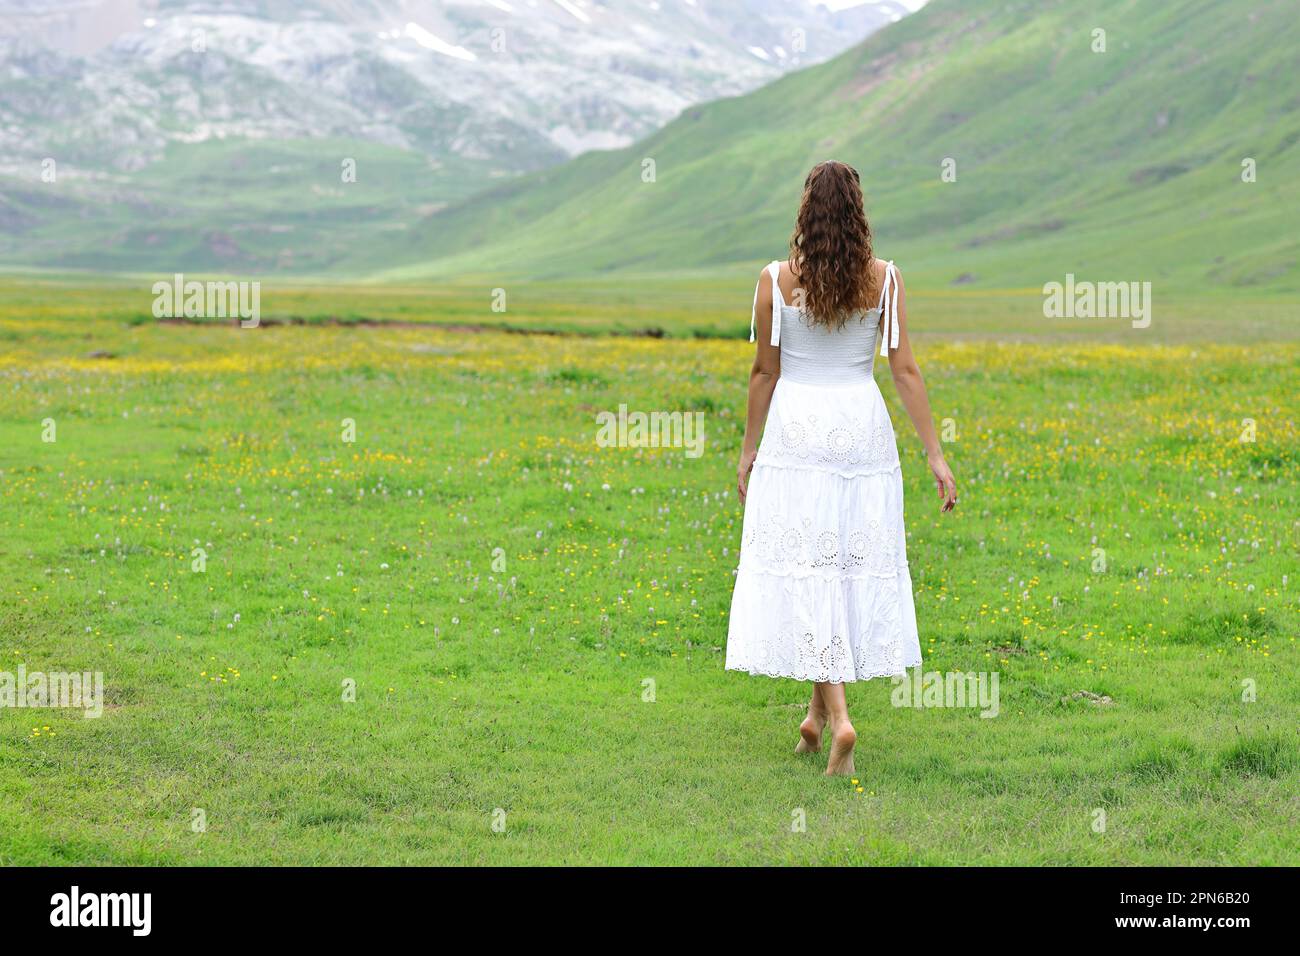 Back view of a woman in white dress walking in nature Stock Photo